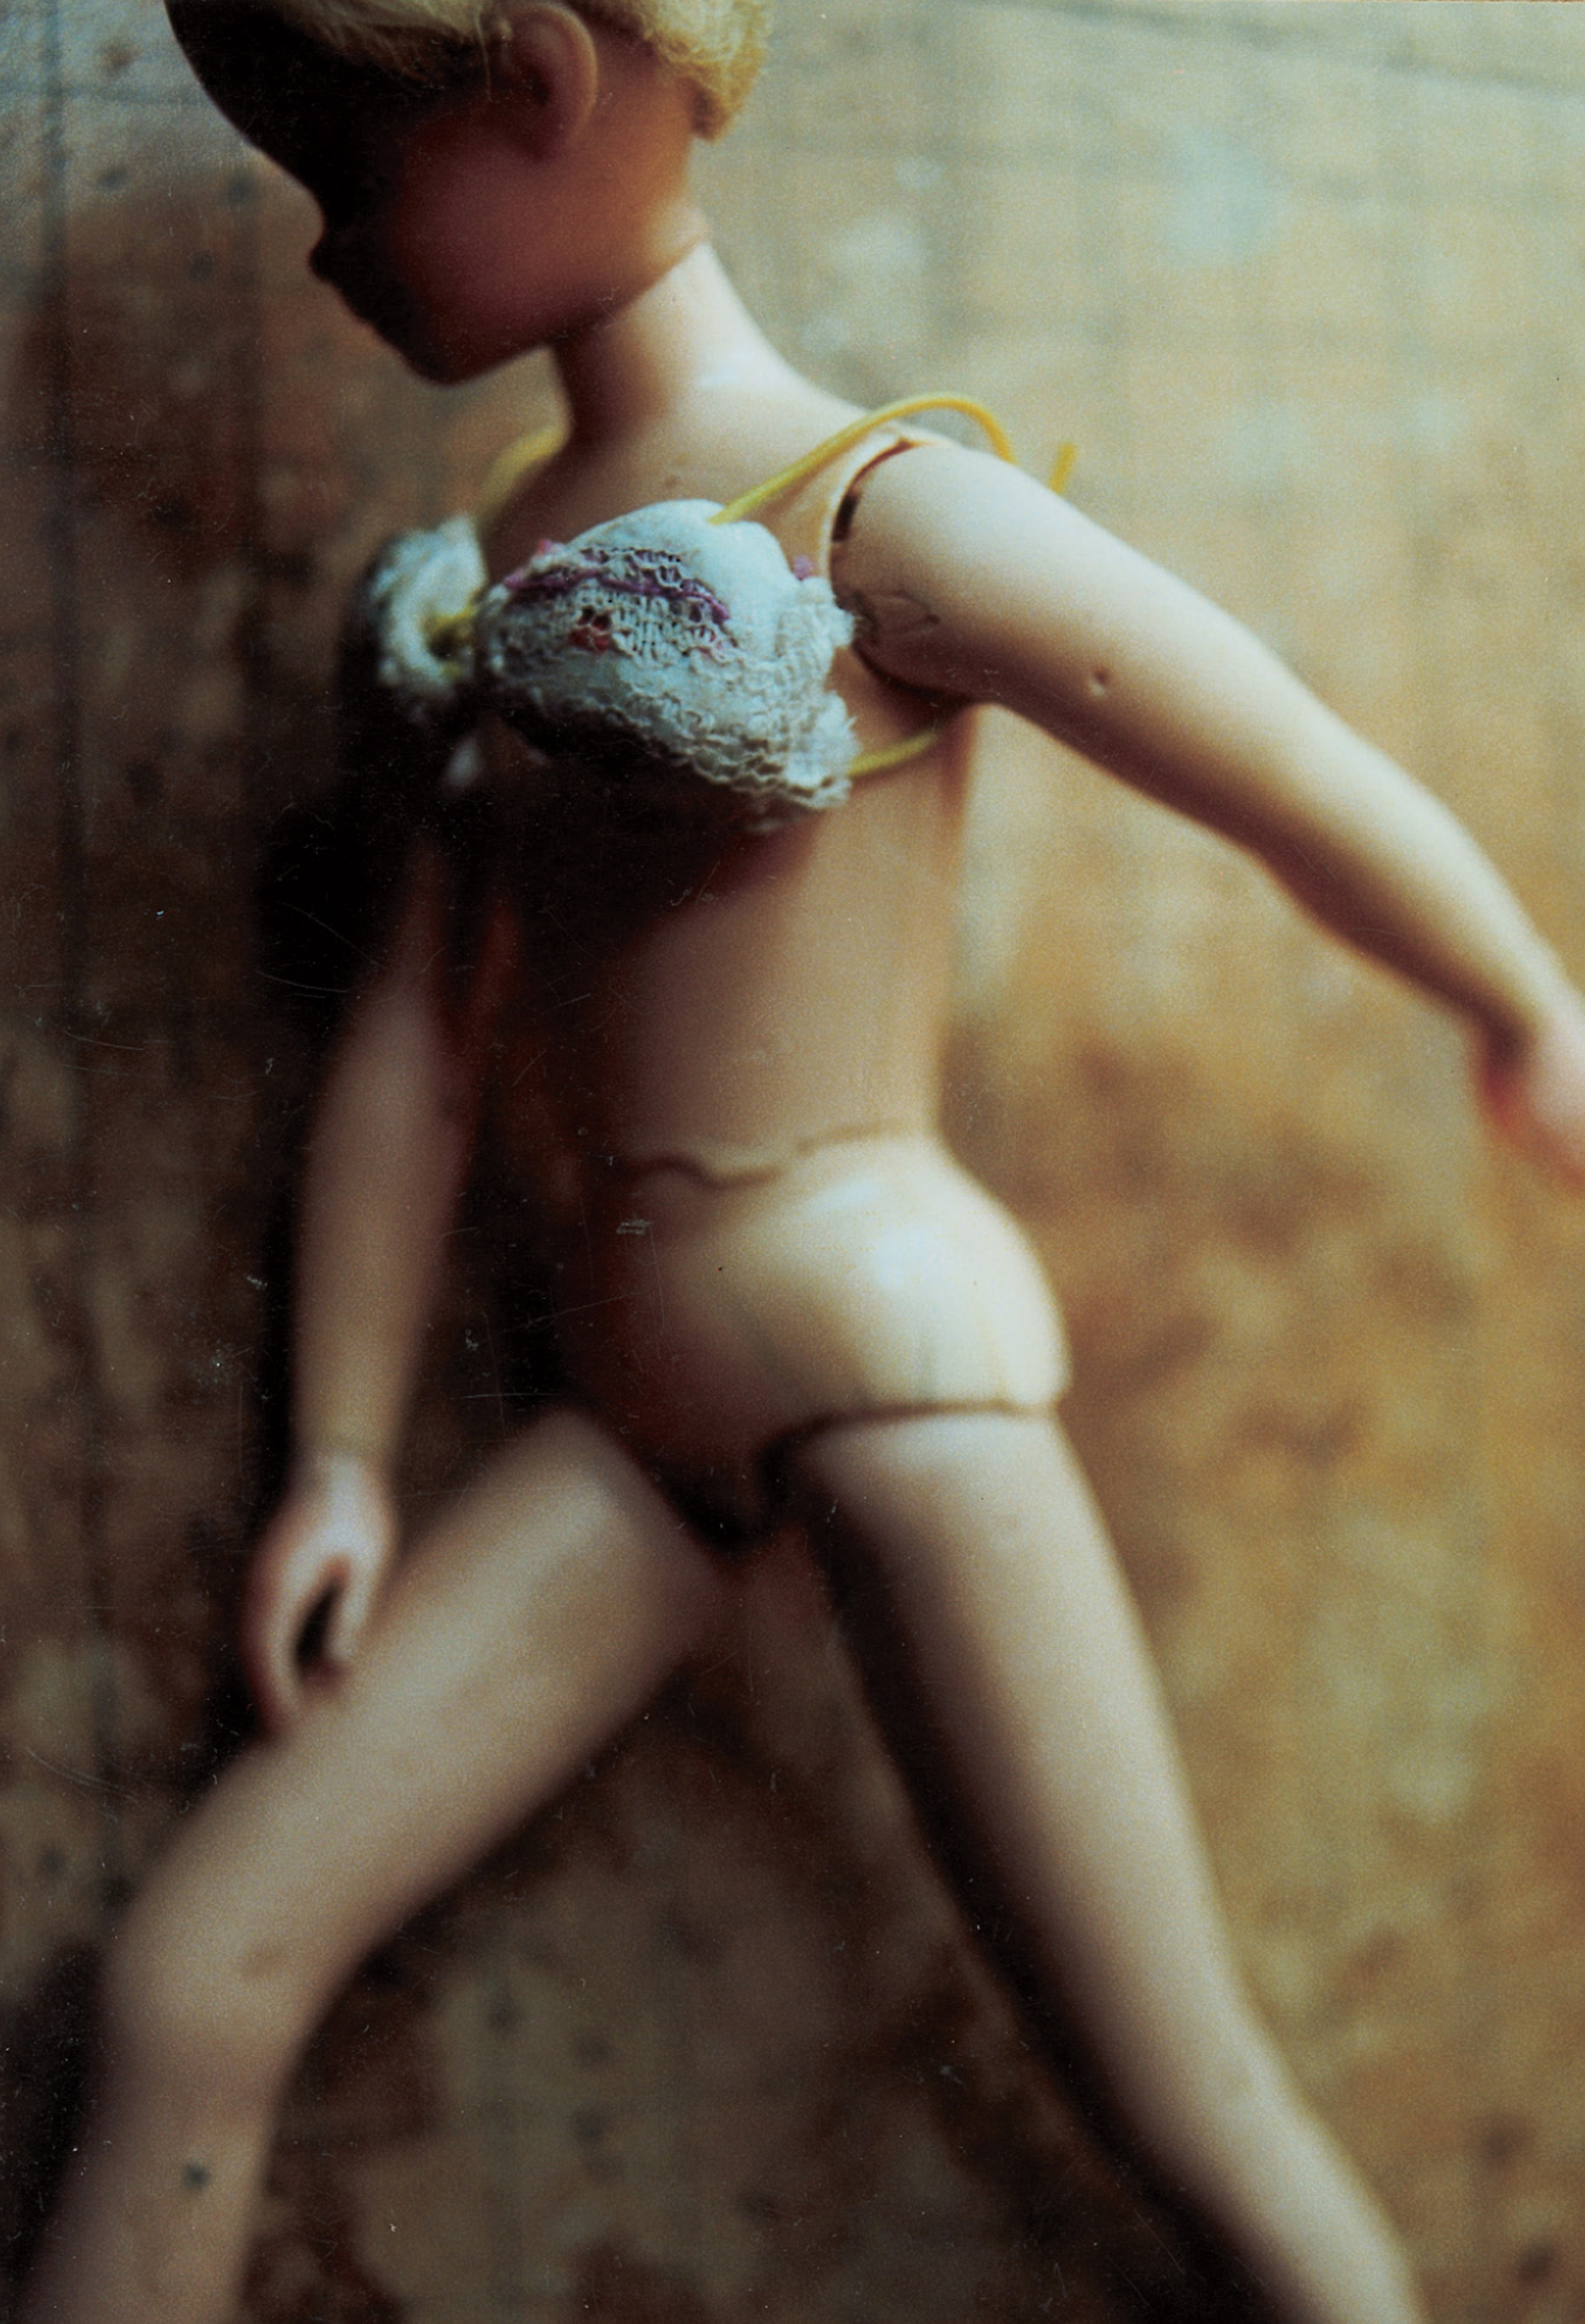 A photograph depicting a female doll named Aina. The caption reads: Presented to S. Jackson under the name “Fluff” in Christmas of 1970 or 1971, Aina became the Doll Games’ first and finest heroine. A cheeky tomboy with cropped hair and a wide smile, Aina led the games through most of their finest years together with Laurie, her sidekick and romantic partner, playing such roles as runaway princess, orphan girl, and pirate apprentice with pluck and panache. Aina acquired a second head some years after the first, and alternated between the two thereafter. She was supplanted by identical twins Mara and Melanie in the later Doll Games; this is generally considered to mark the beginning of the decadent era, and of the Doll Games’ eventual decline.